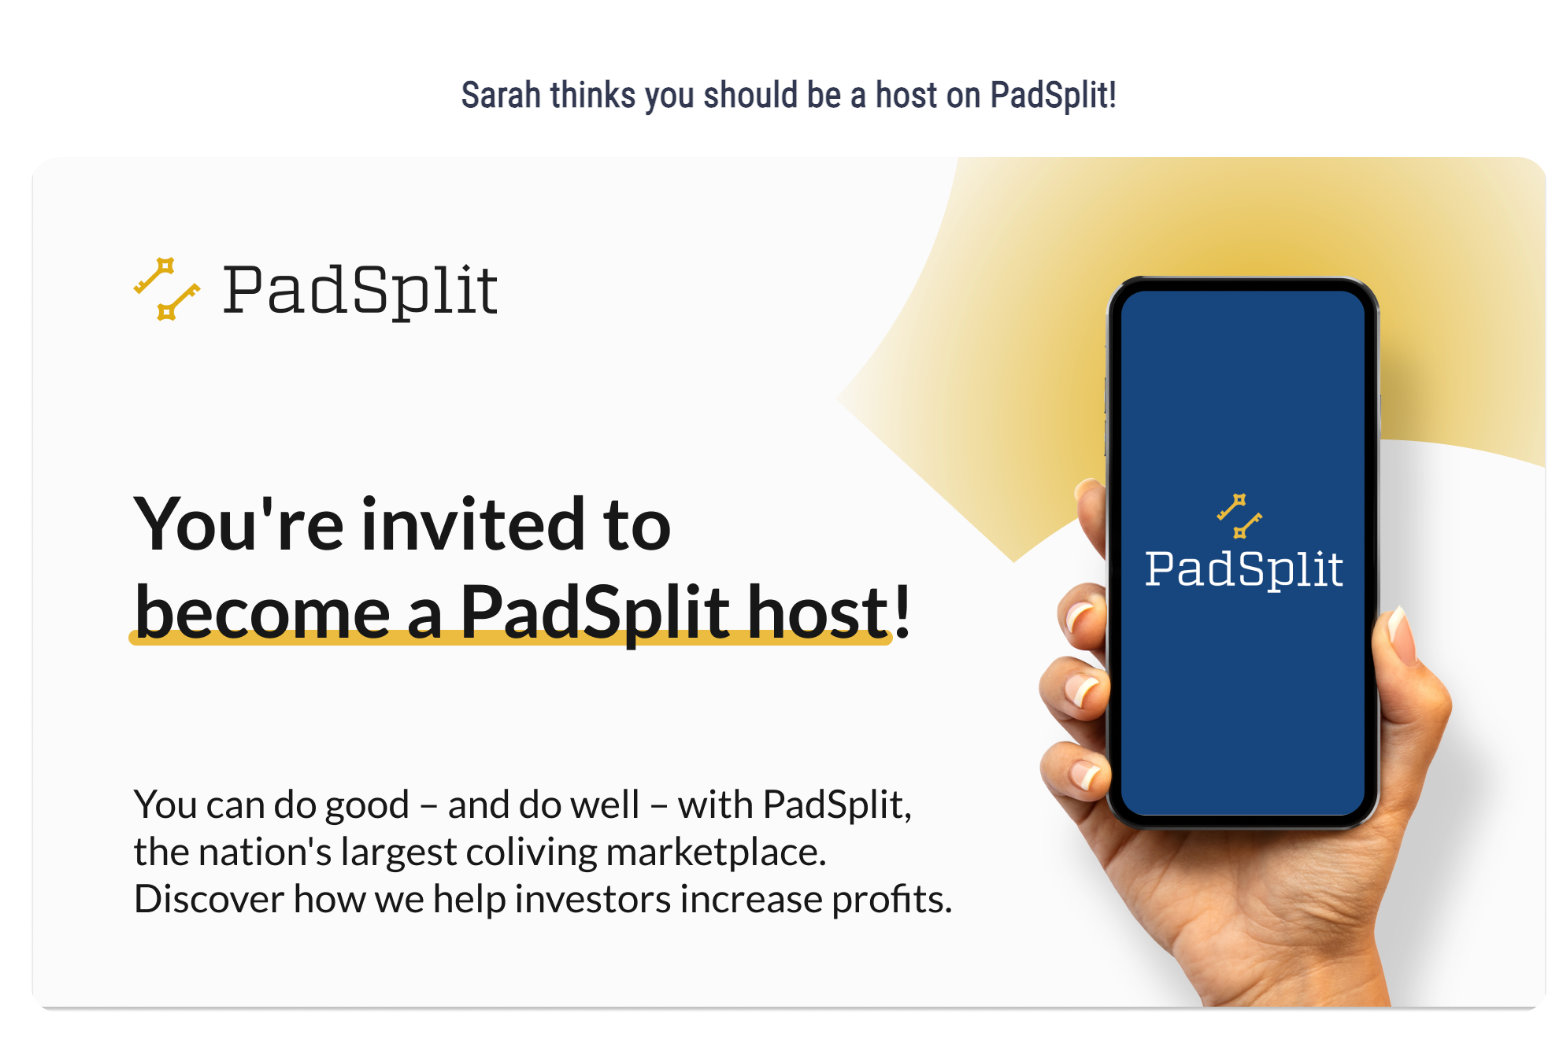 PadSplit: A New Avenue for Job Seekers to Enhance Income Through Real Estate